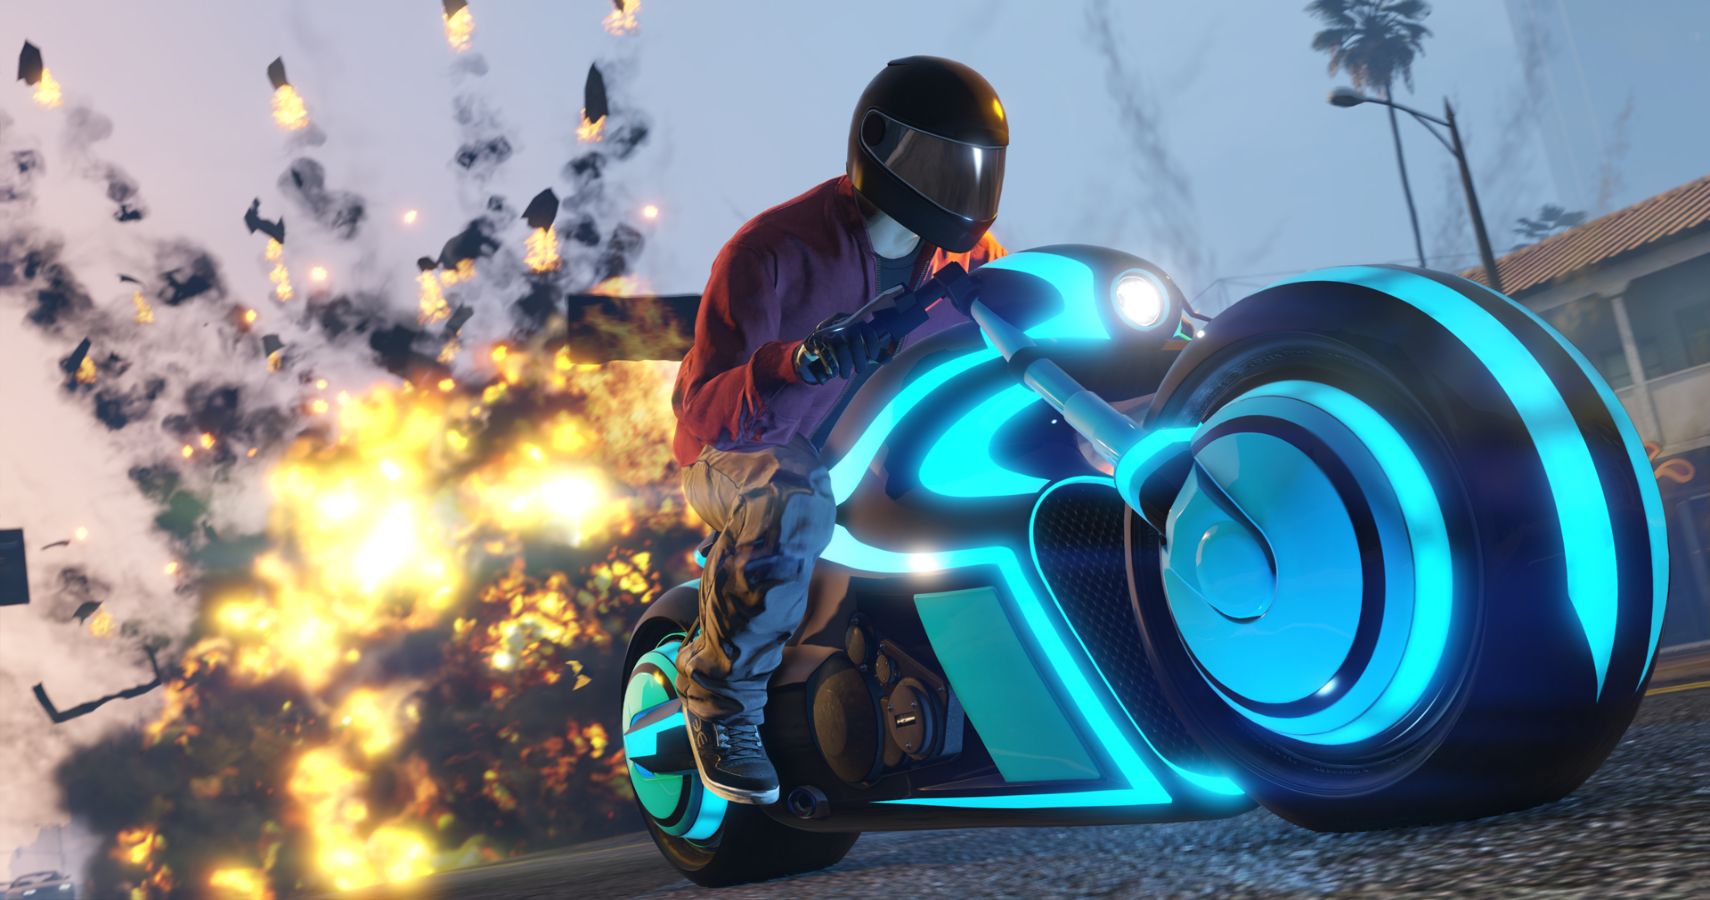 Get A Sweet Tron Bike At A Discount This Weekend's GTA Events